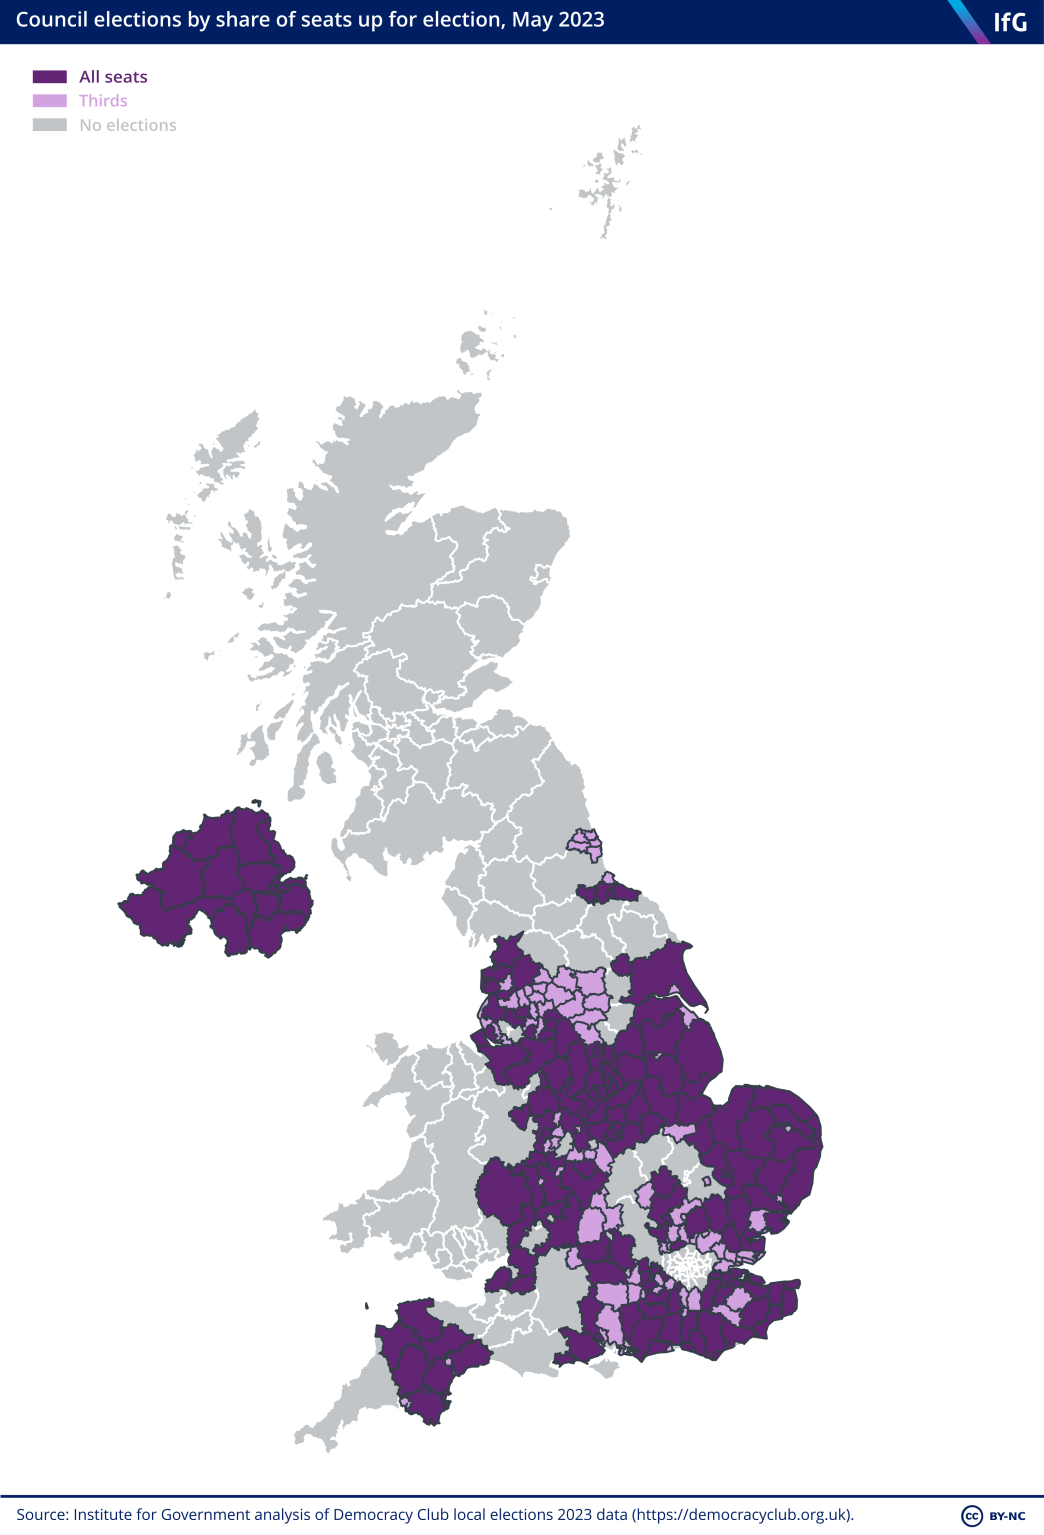 A map of where local elections are taking place in the UK in May 2023.